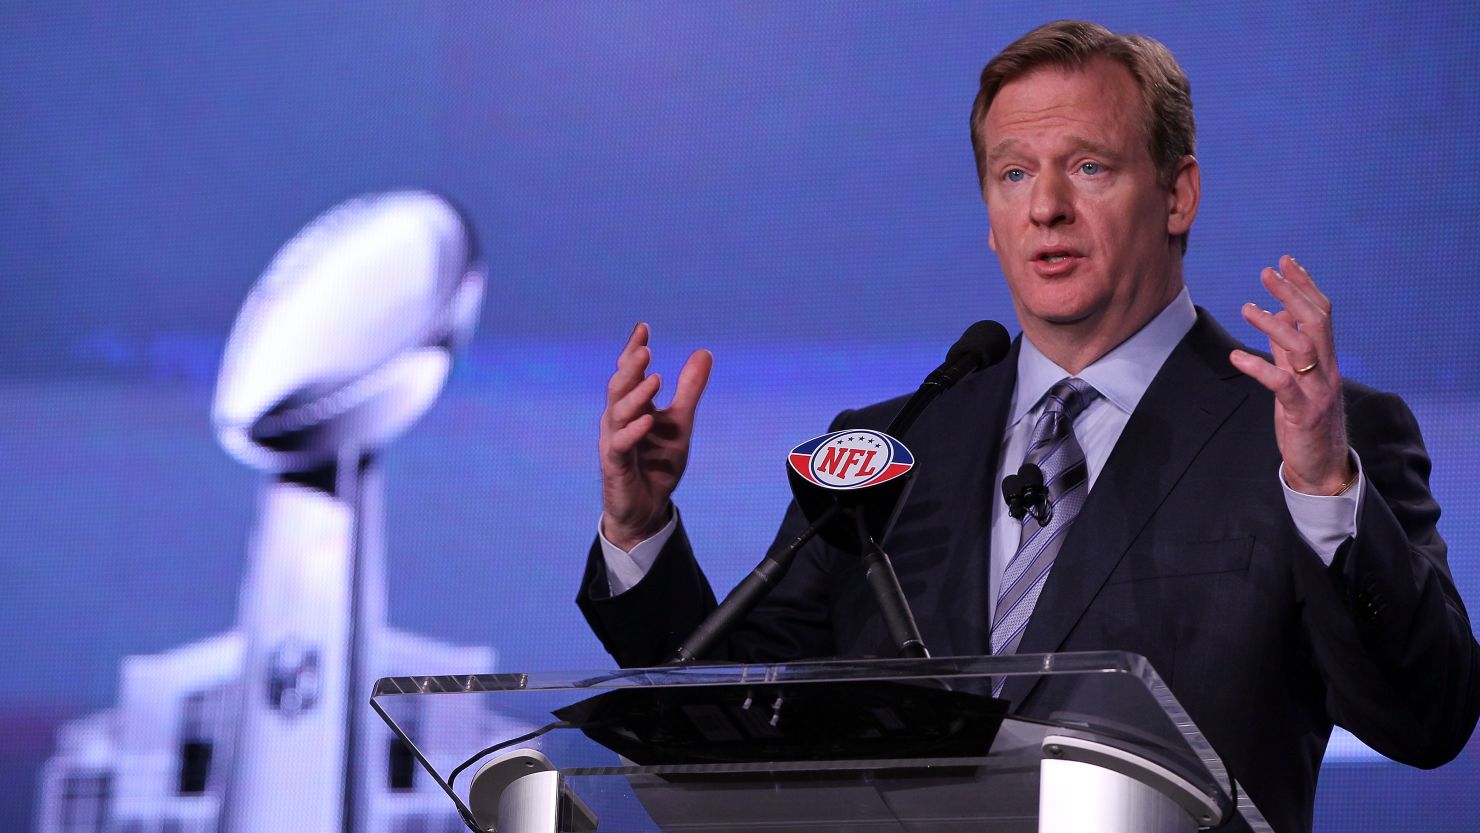 NFL Commissioner Roger Goodell has made it clear that the NFL will not tolerate this type of violence, William Bennett says.